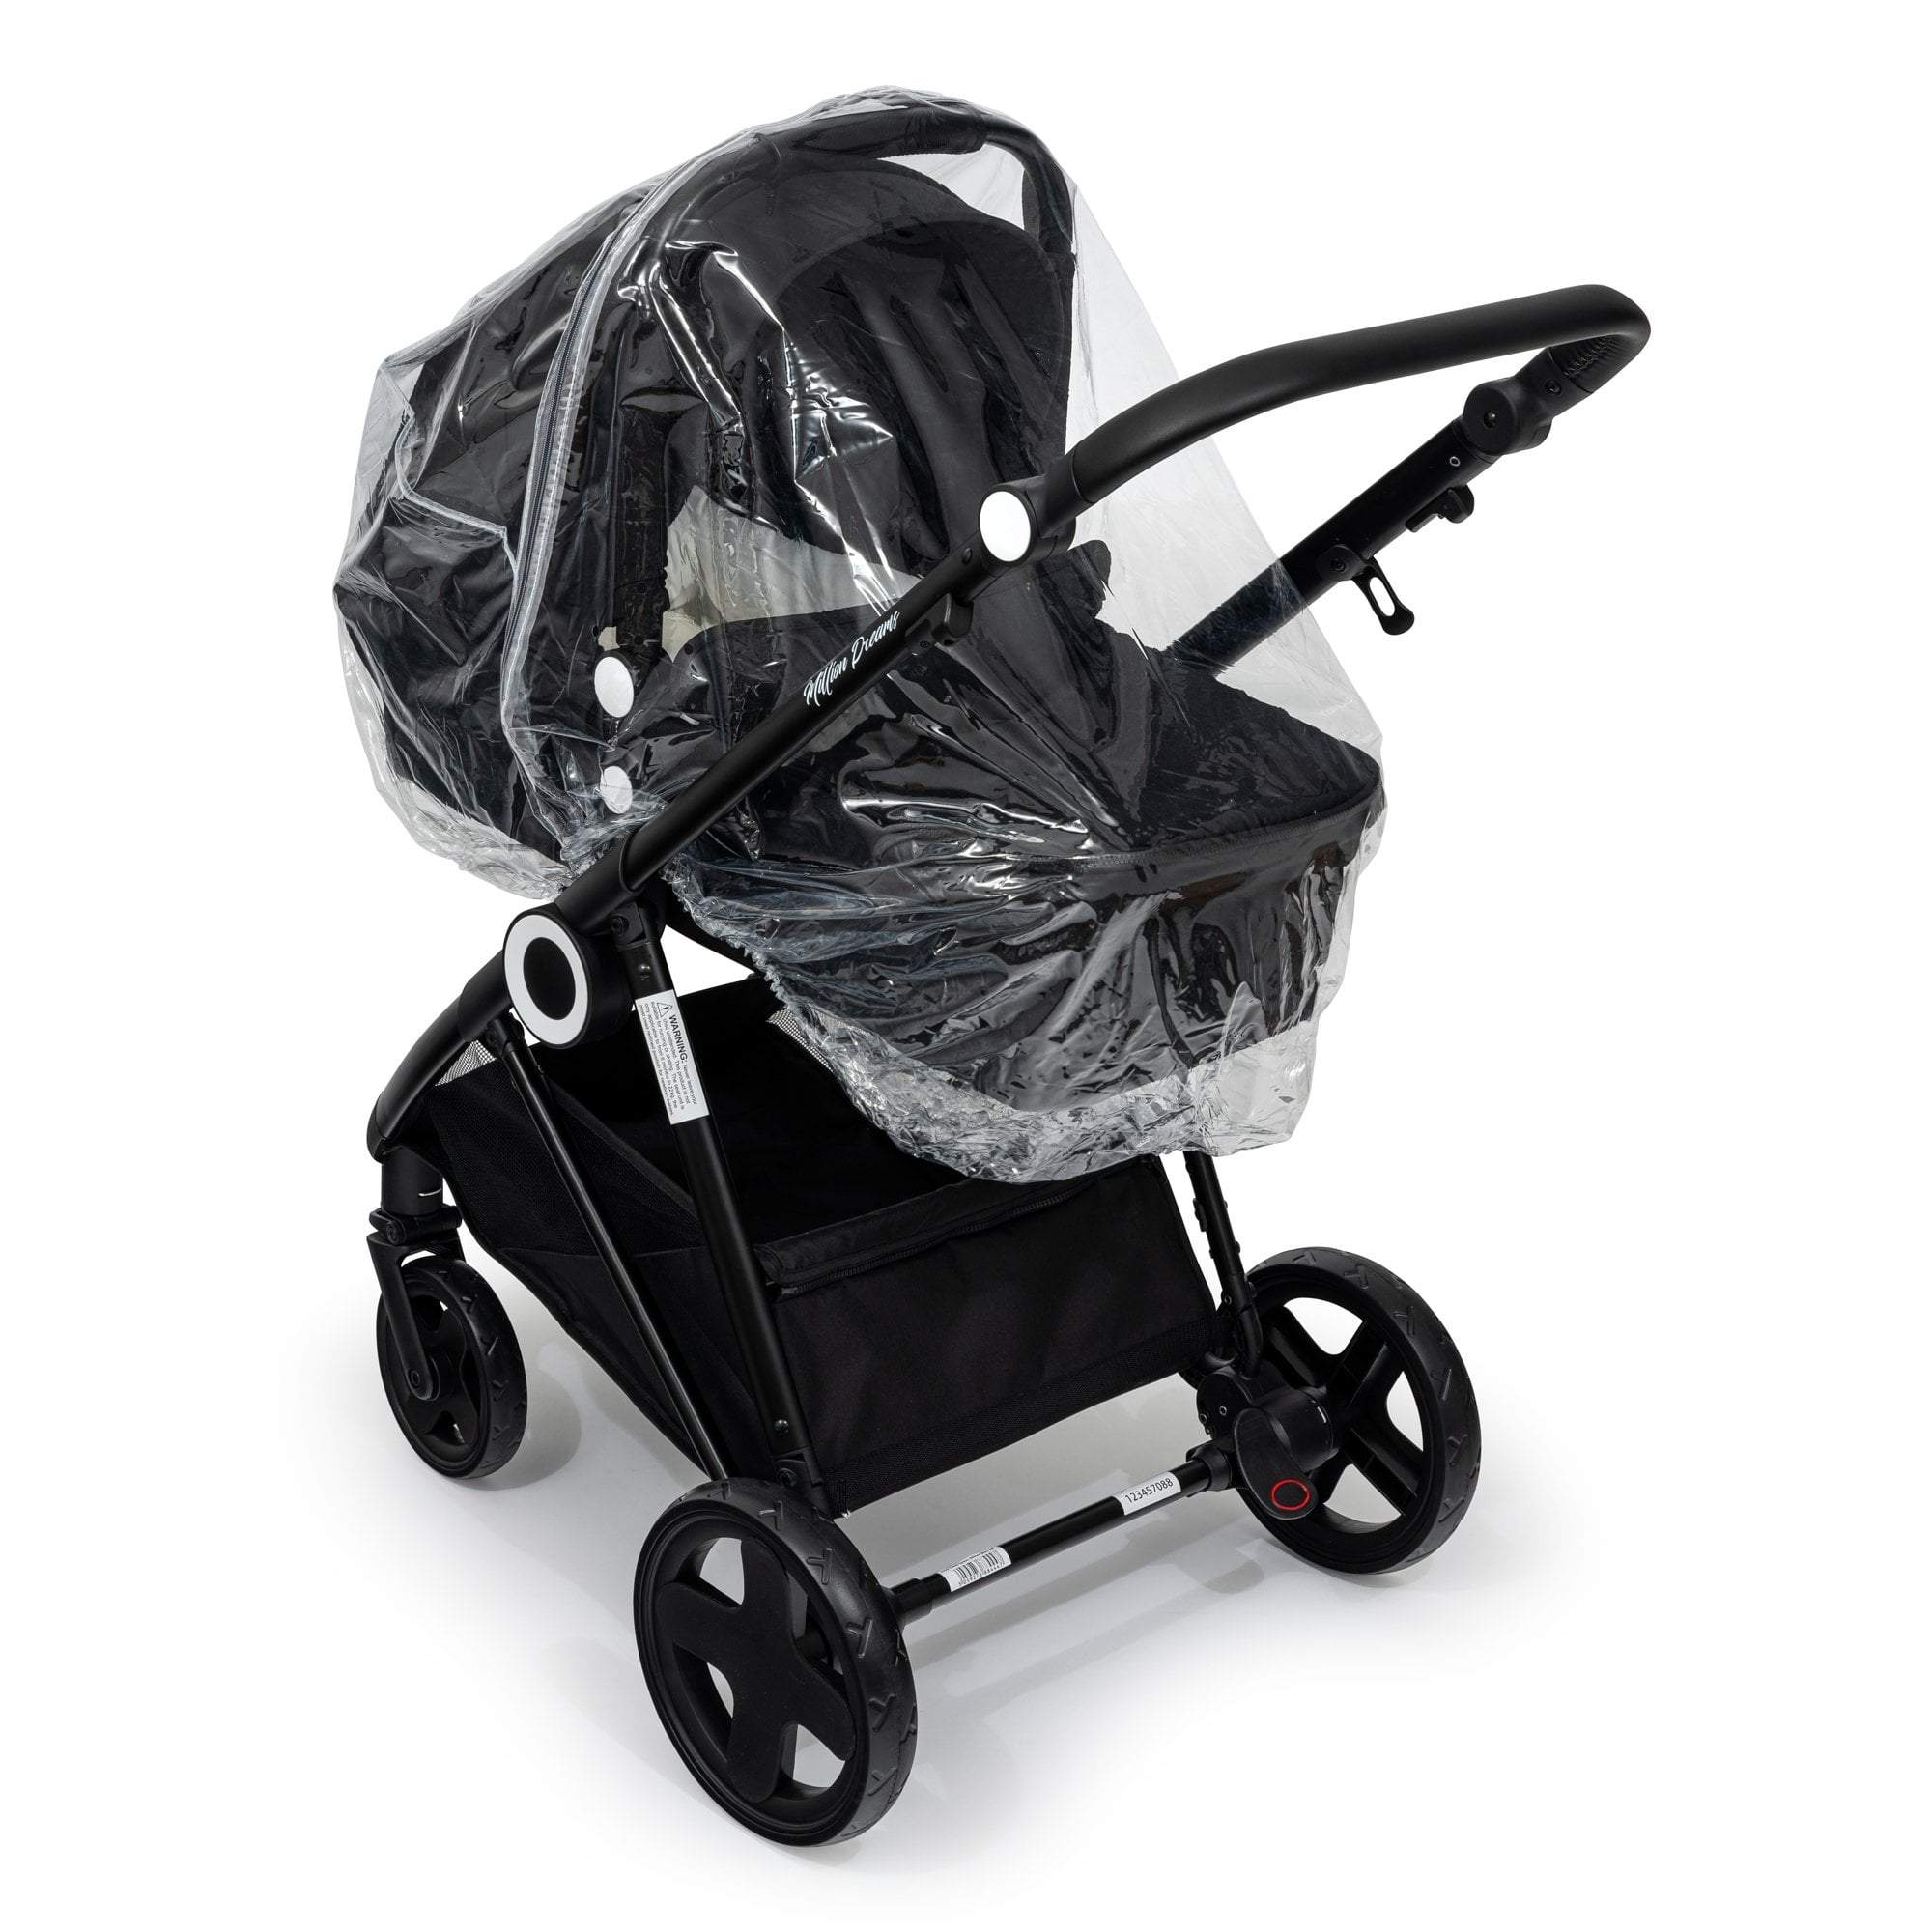 Carrycot Raincover Compatible With Cosatto - Fits All Models - For Your Little One